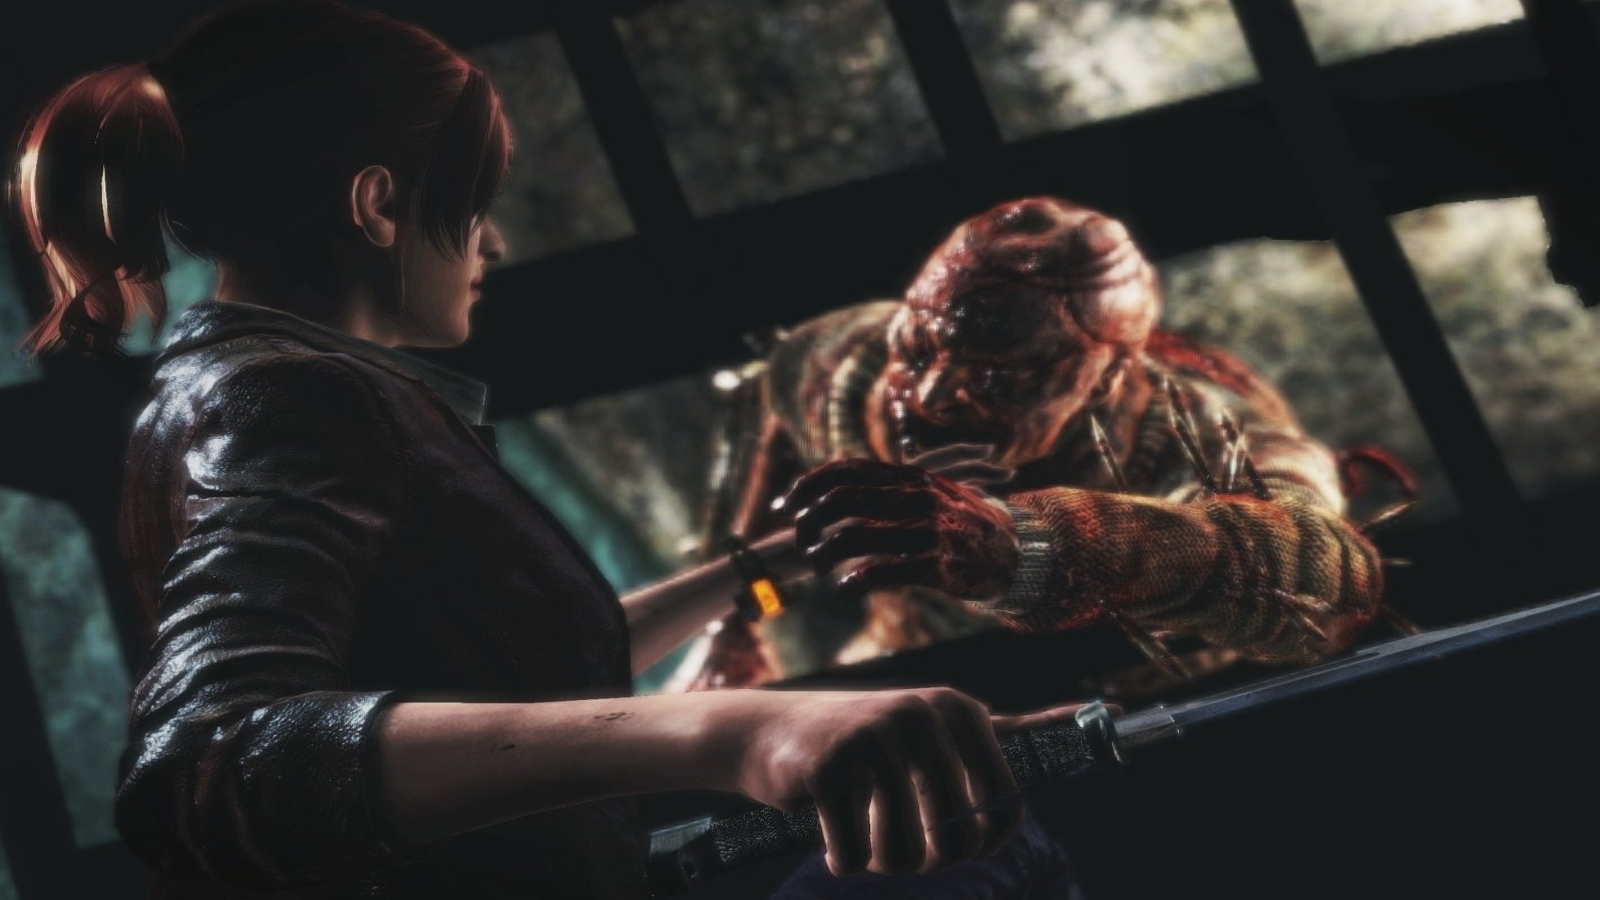 News Briefs: First Look at 'Resident Evil: The Final Chapter' from